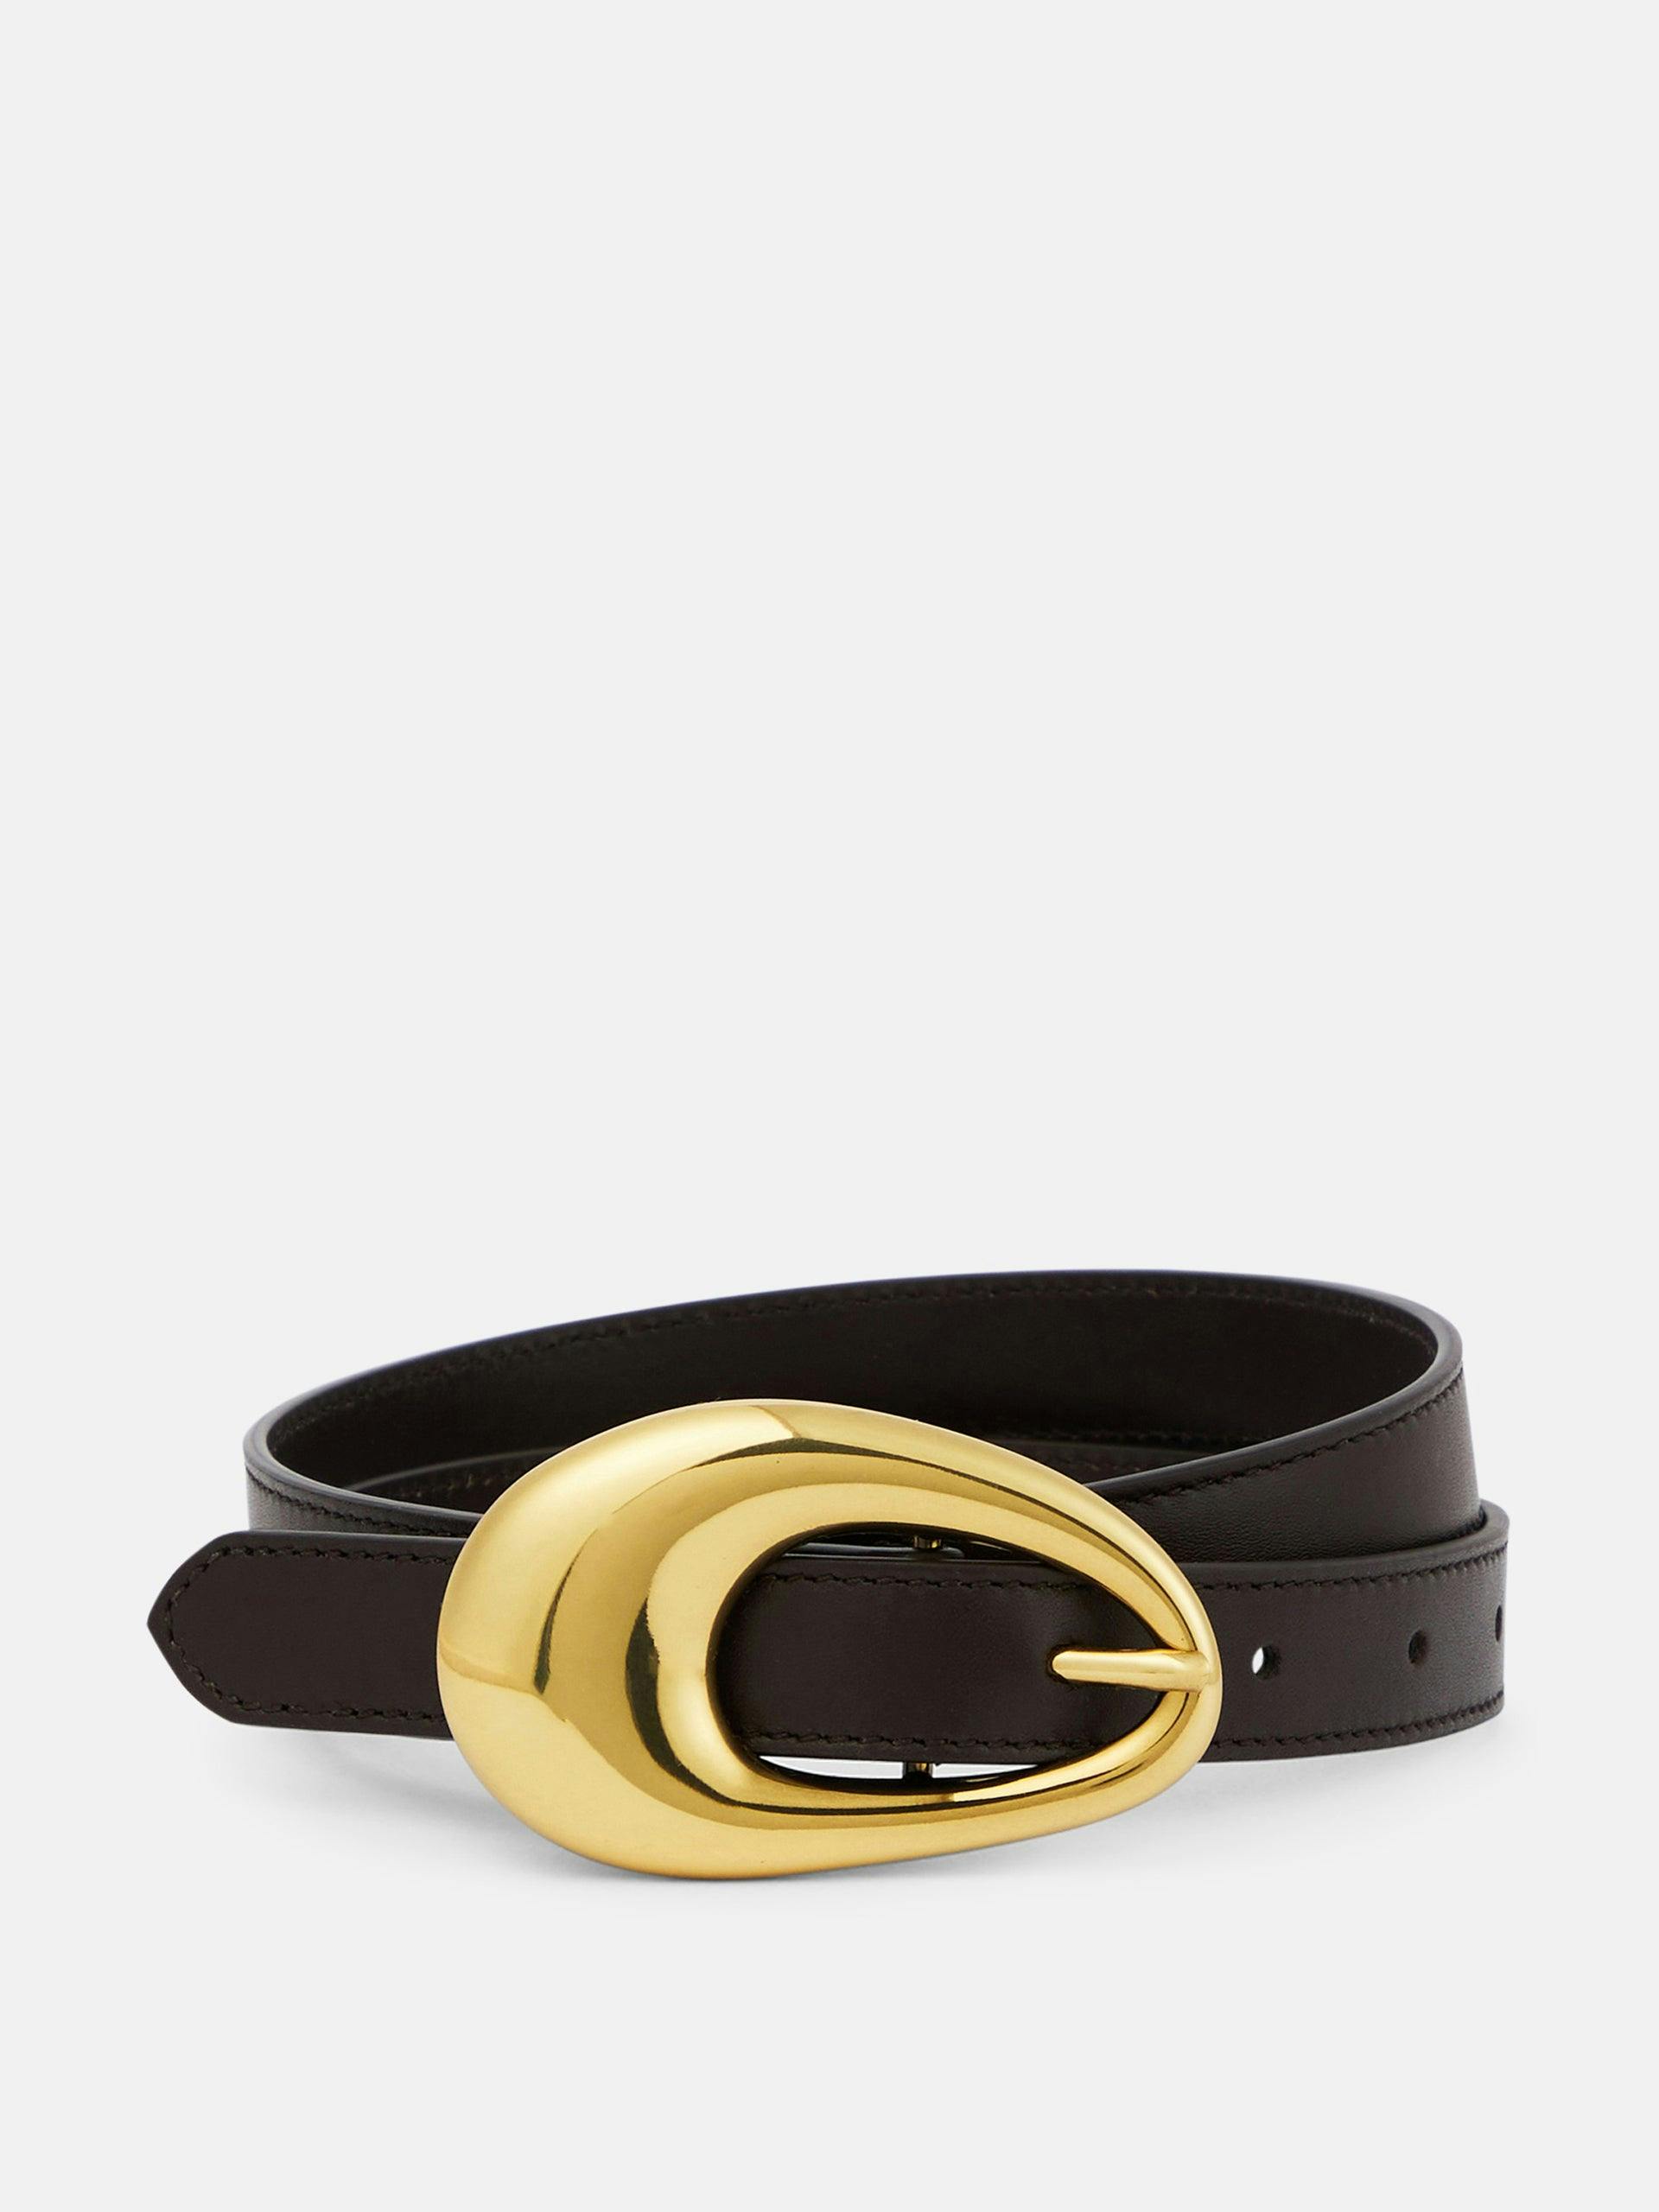 Leather belt with gold-toned buckle